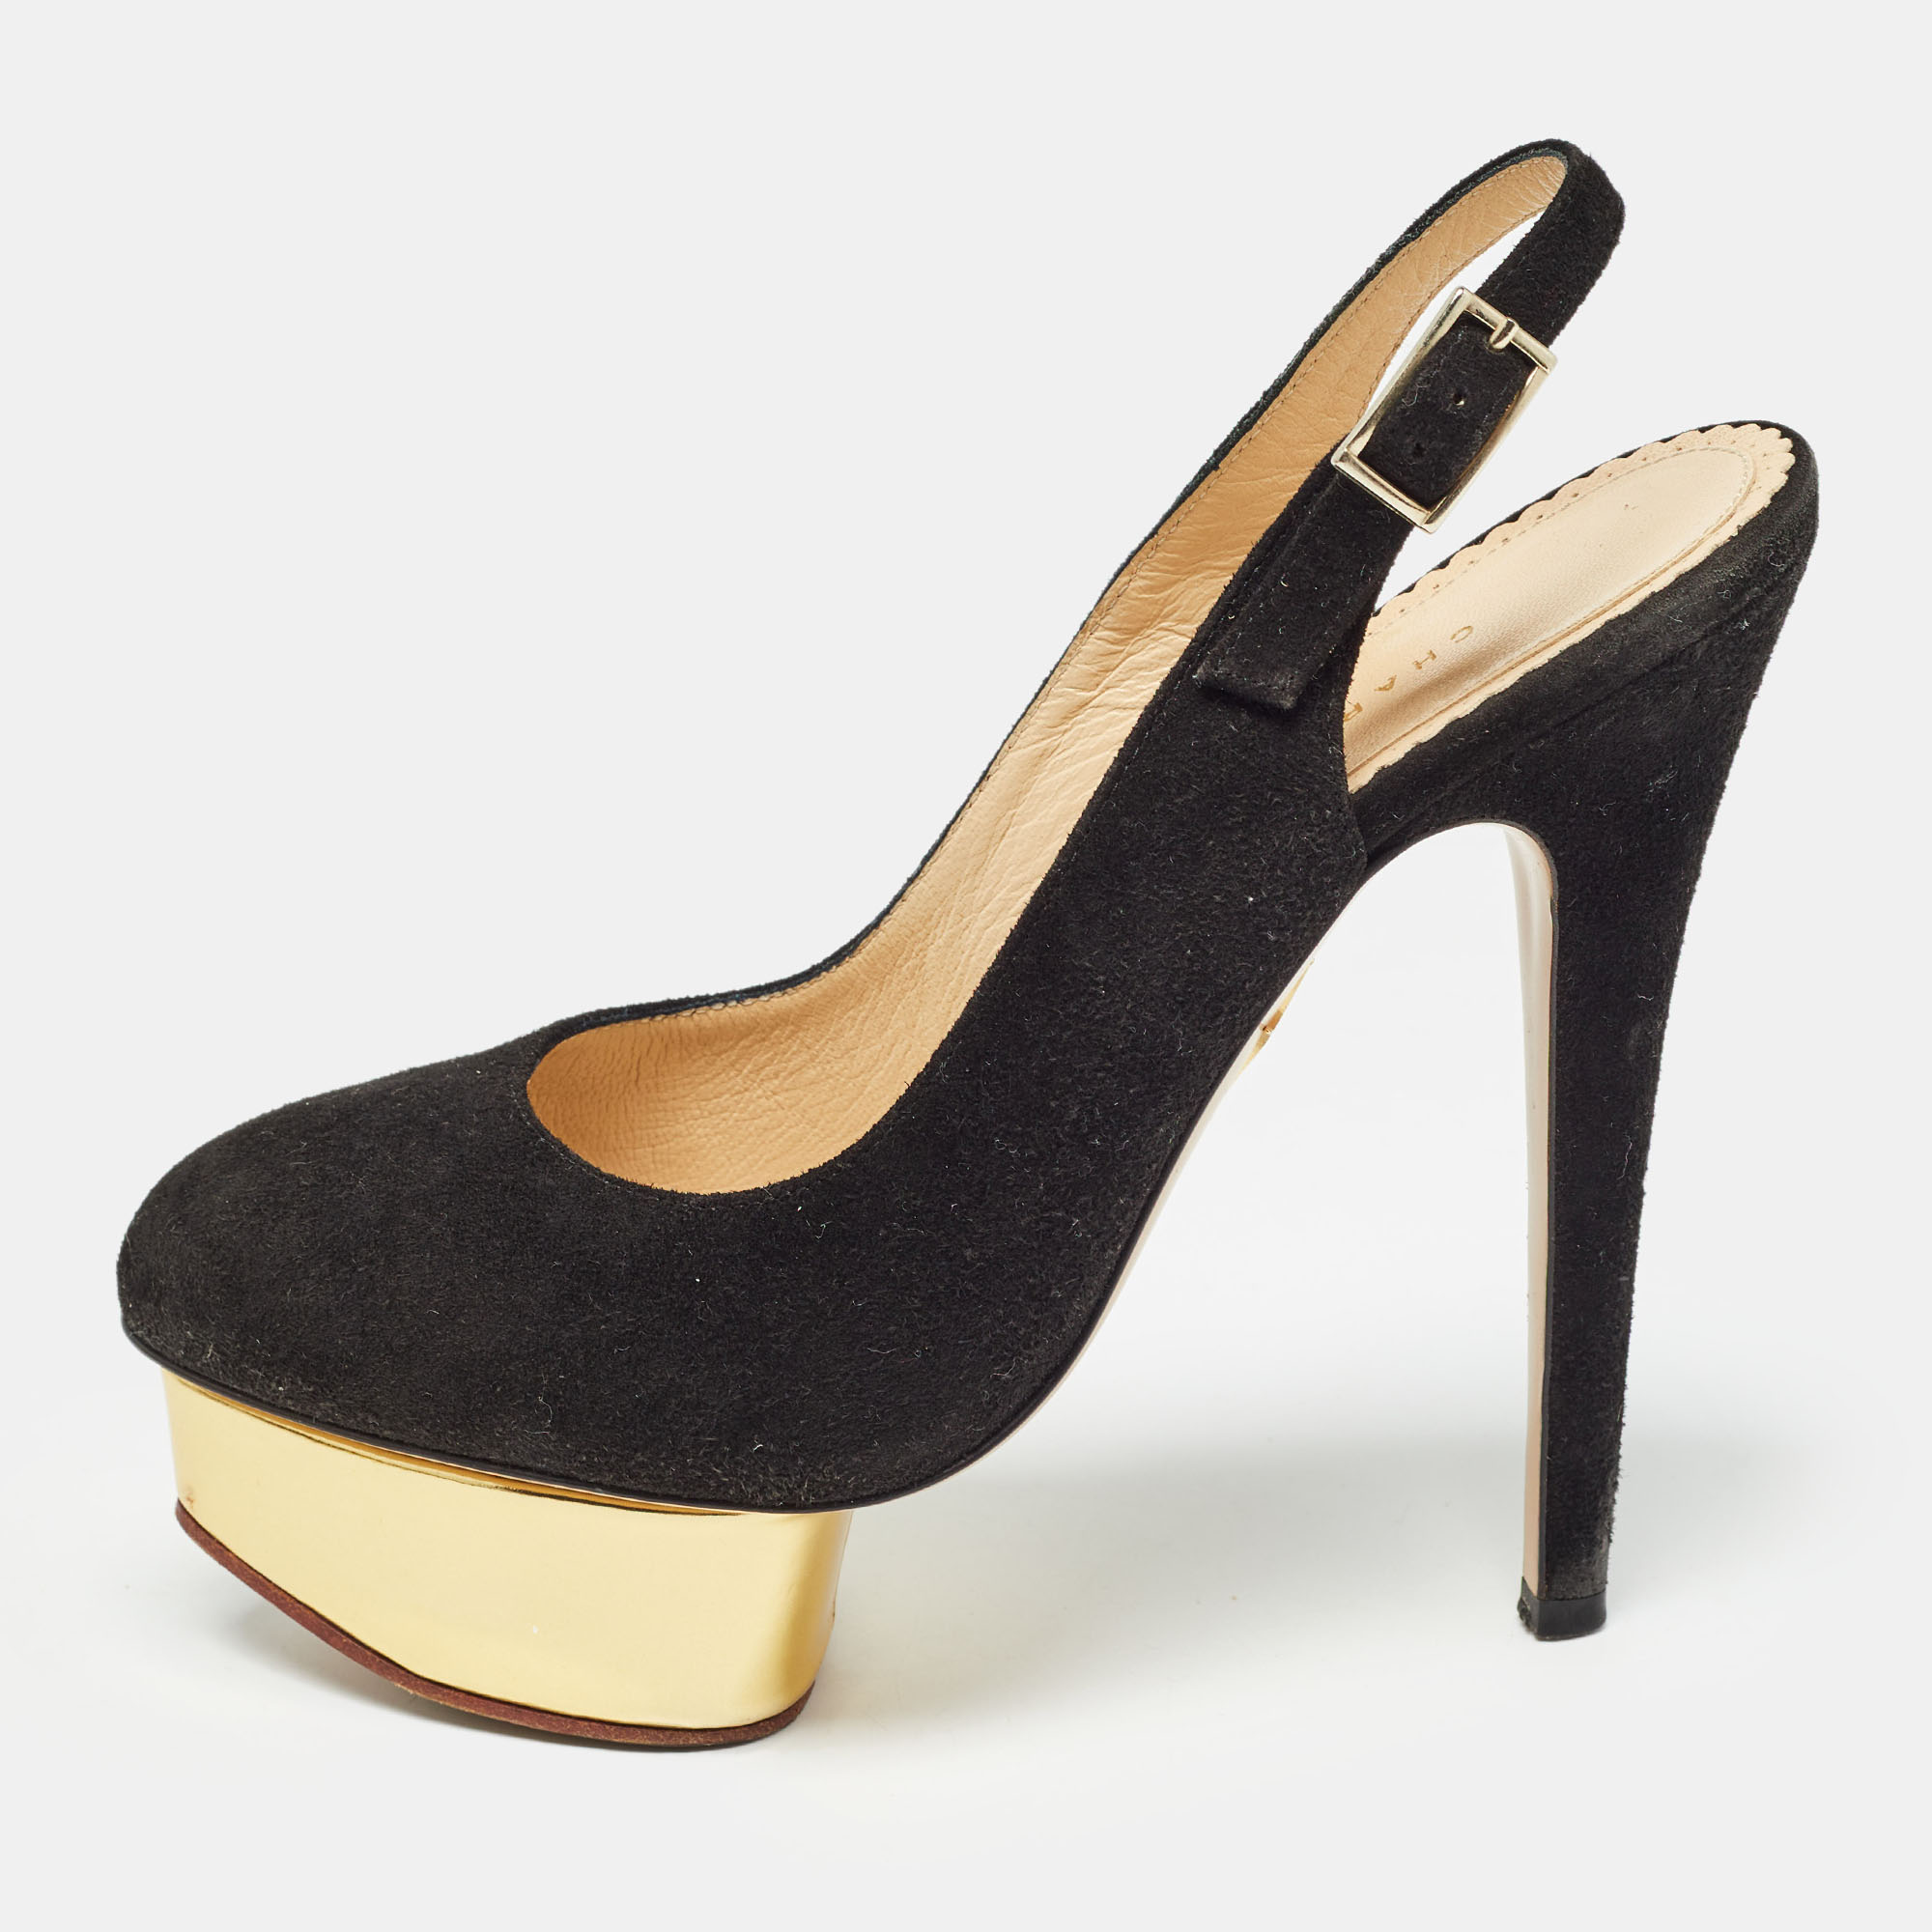 Charlotte olympia black suede dolly pumps size 36.5